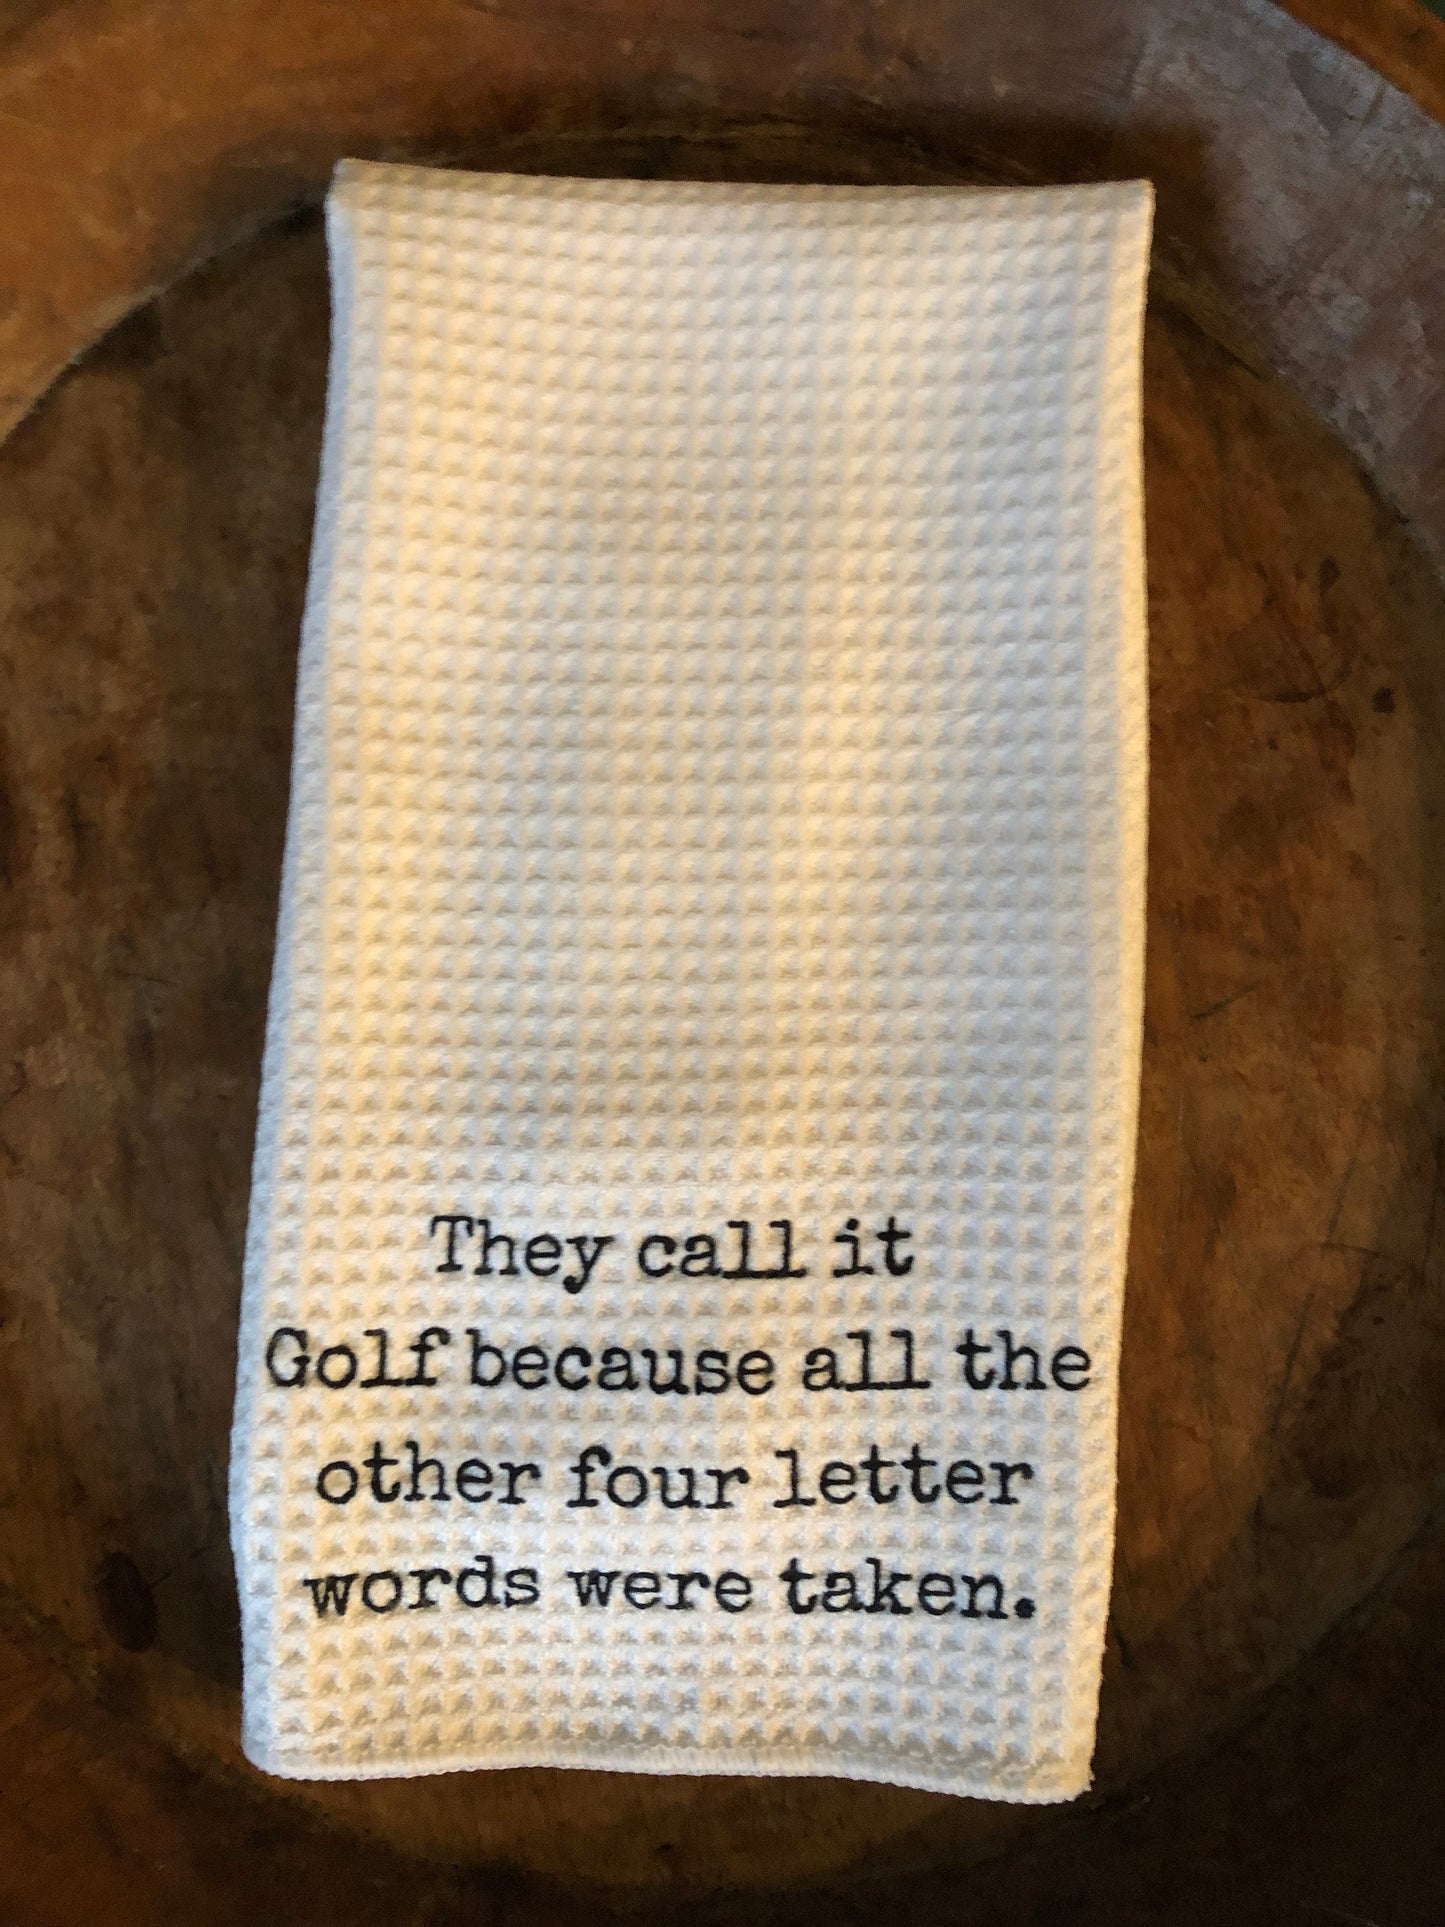 PDX Flower Power "They call it golf because all the other 4 letter words were taken." Funny Towel